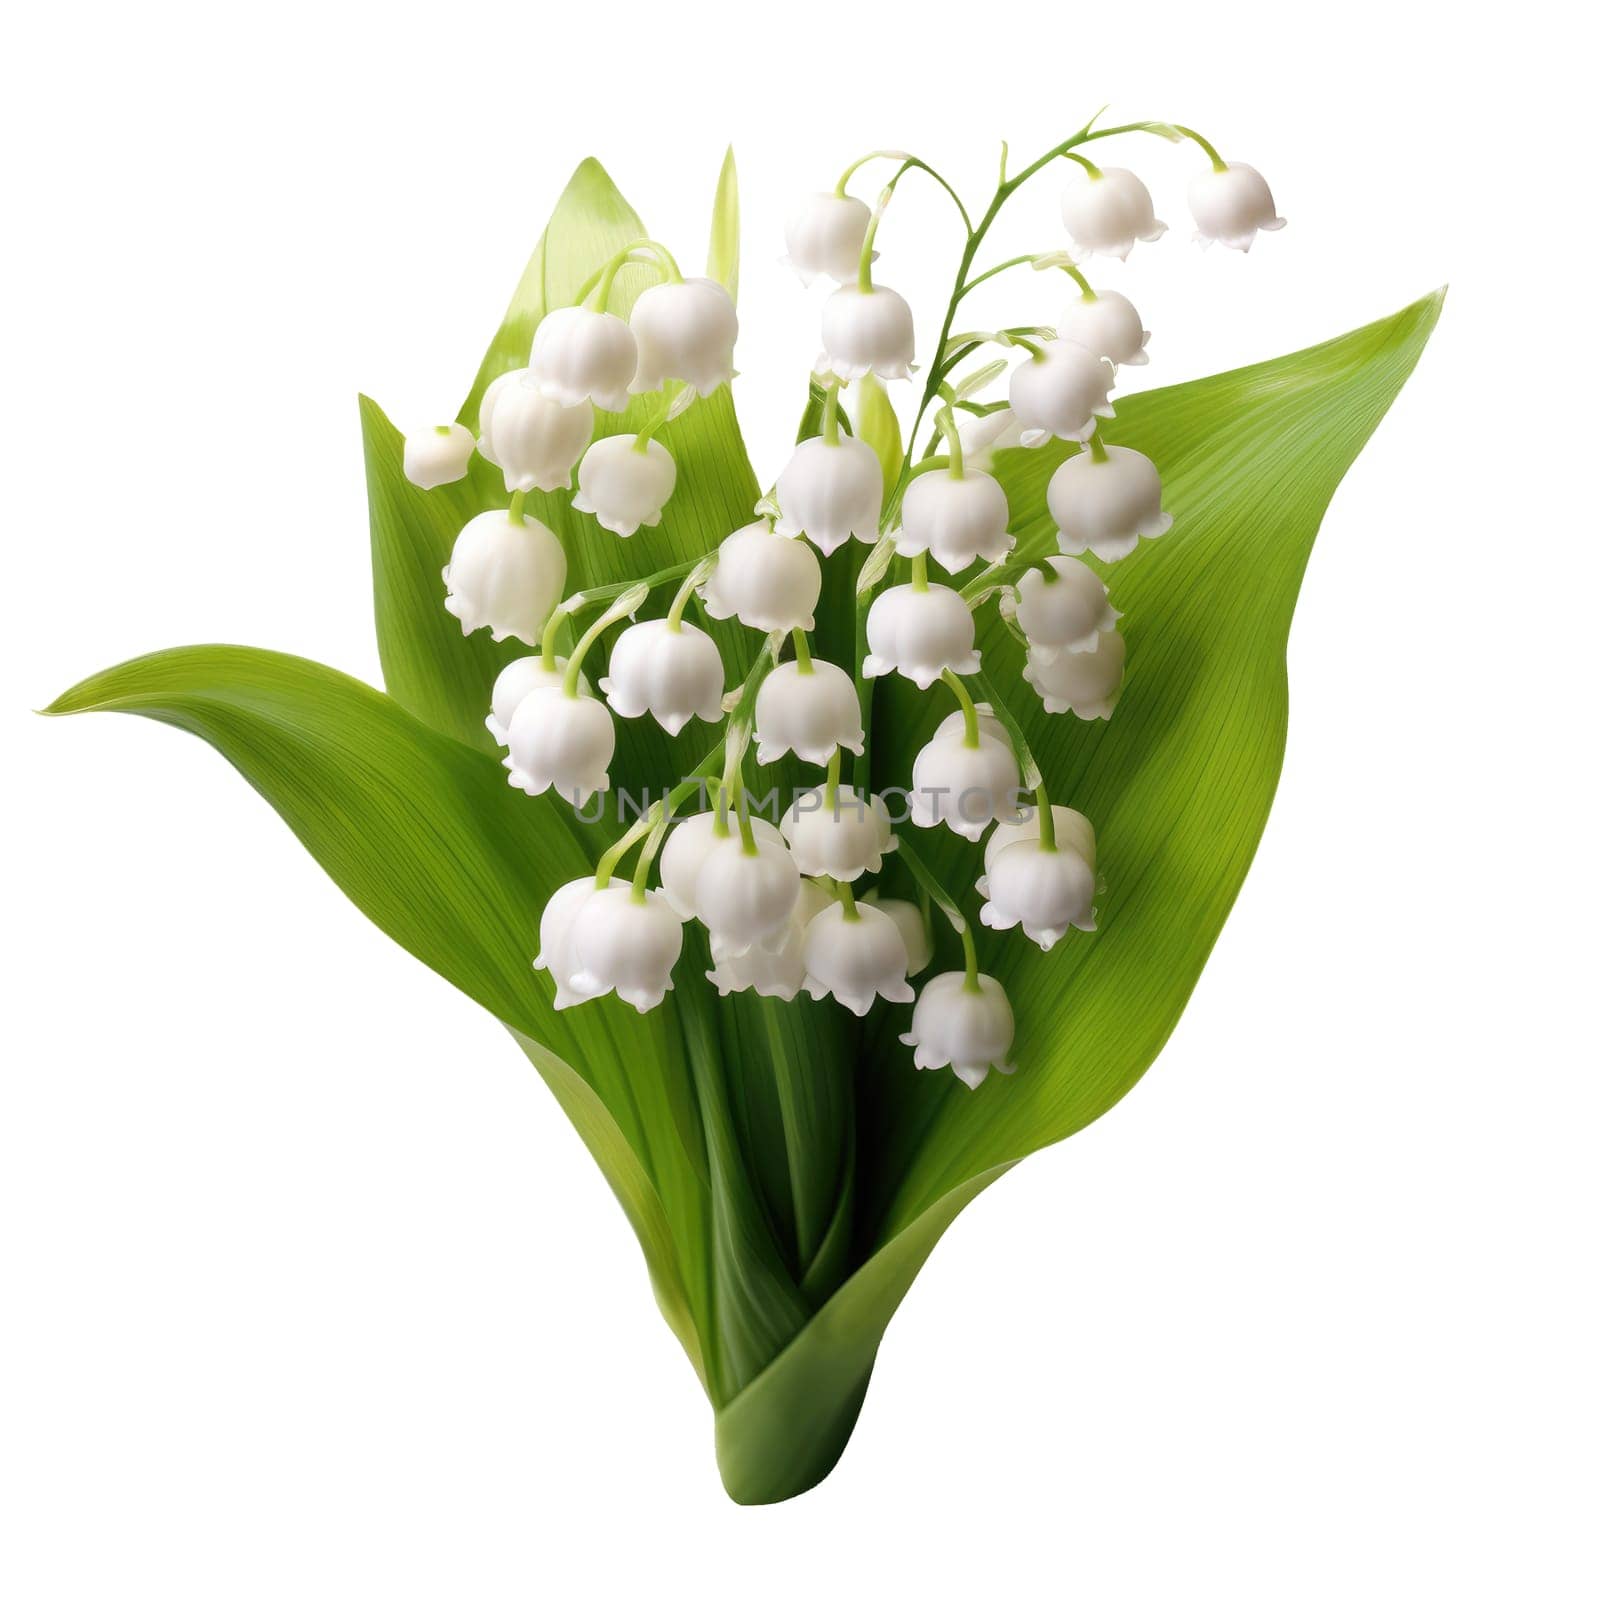 Lily of the valley isolated on white background by natali_brill